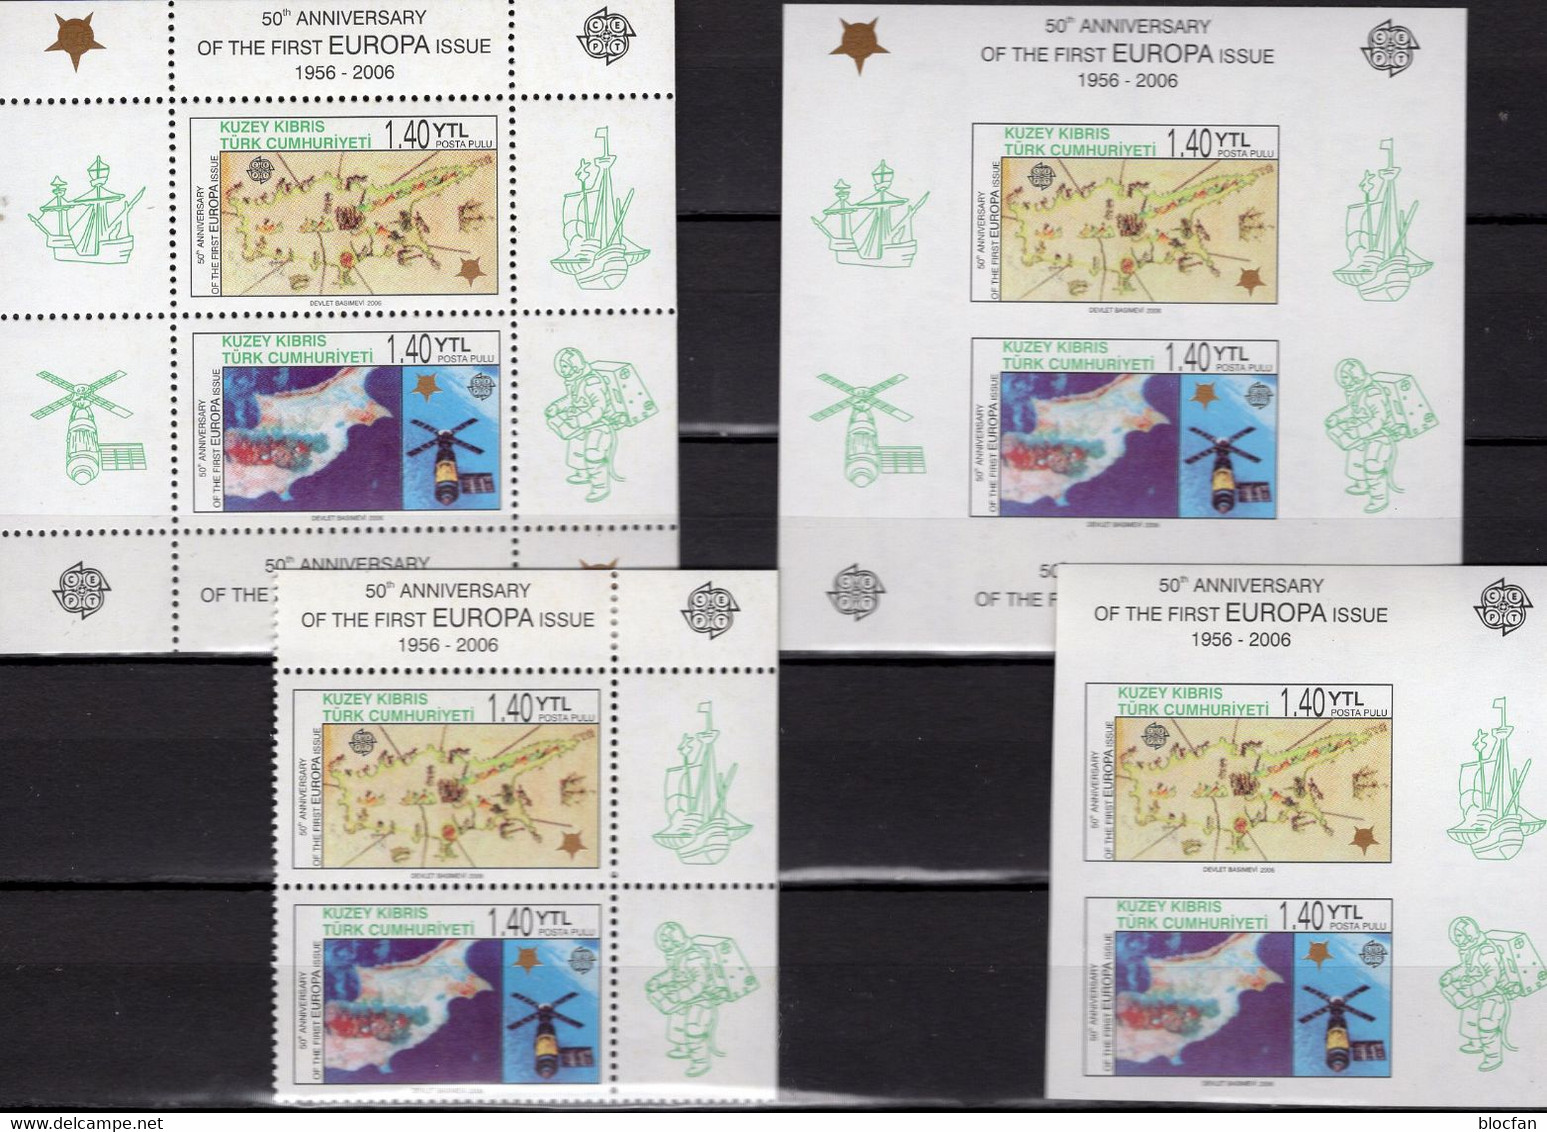 Blöcke CEPT 2006 TK-Zypern 630/1 2VB+Block 24A/B ** 28€ Stamps On Stamp M/s Hoja Blocs Ss Sheets Bf 50 Years EUROPE - Perfin